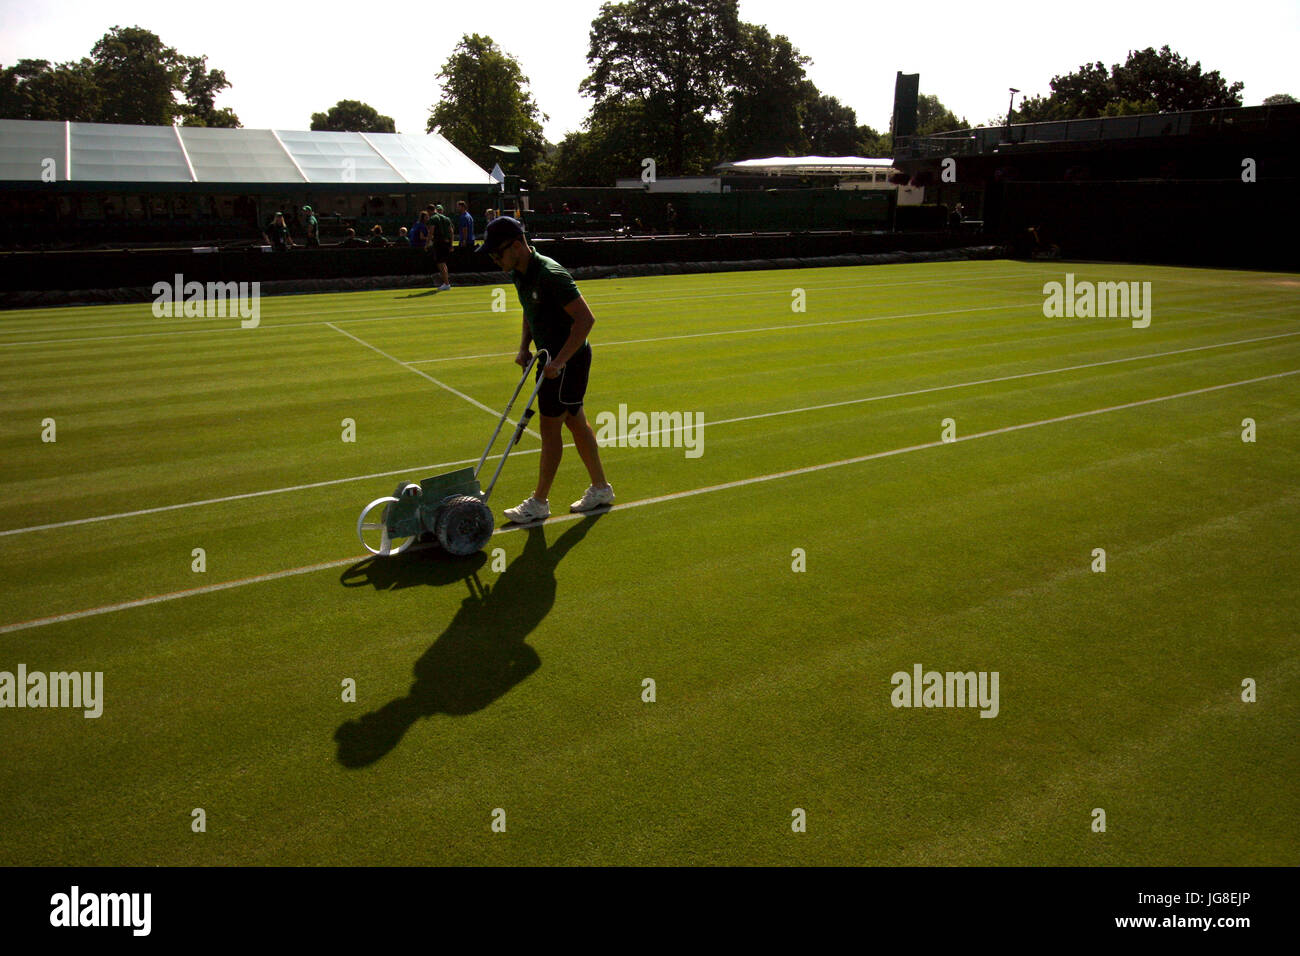 London, UK. 04th July, 2017. A bellboy chalks the line of one of the outside courts at the All England Lawn Tennis Club as preparation for day 2 of Wimbledon. Credit: Adam Stoltman/Alamy Live News Stock Photo